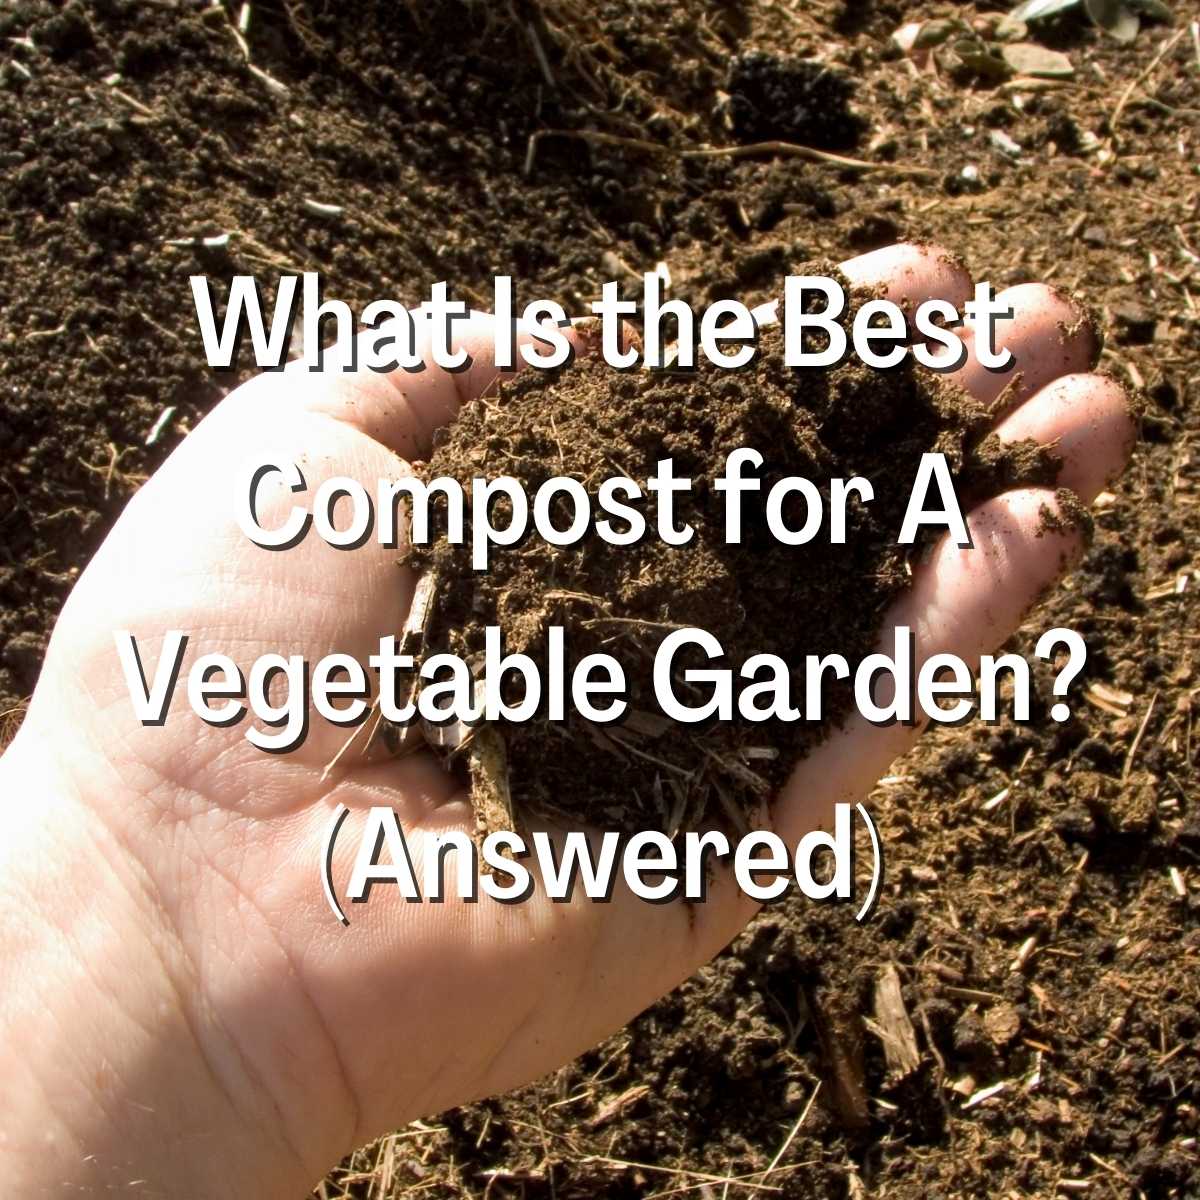 the Best Compost for A Vegetable Garden